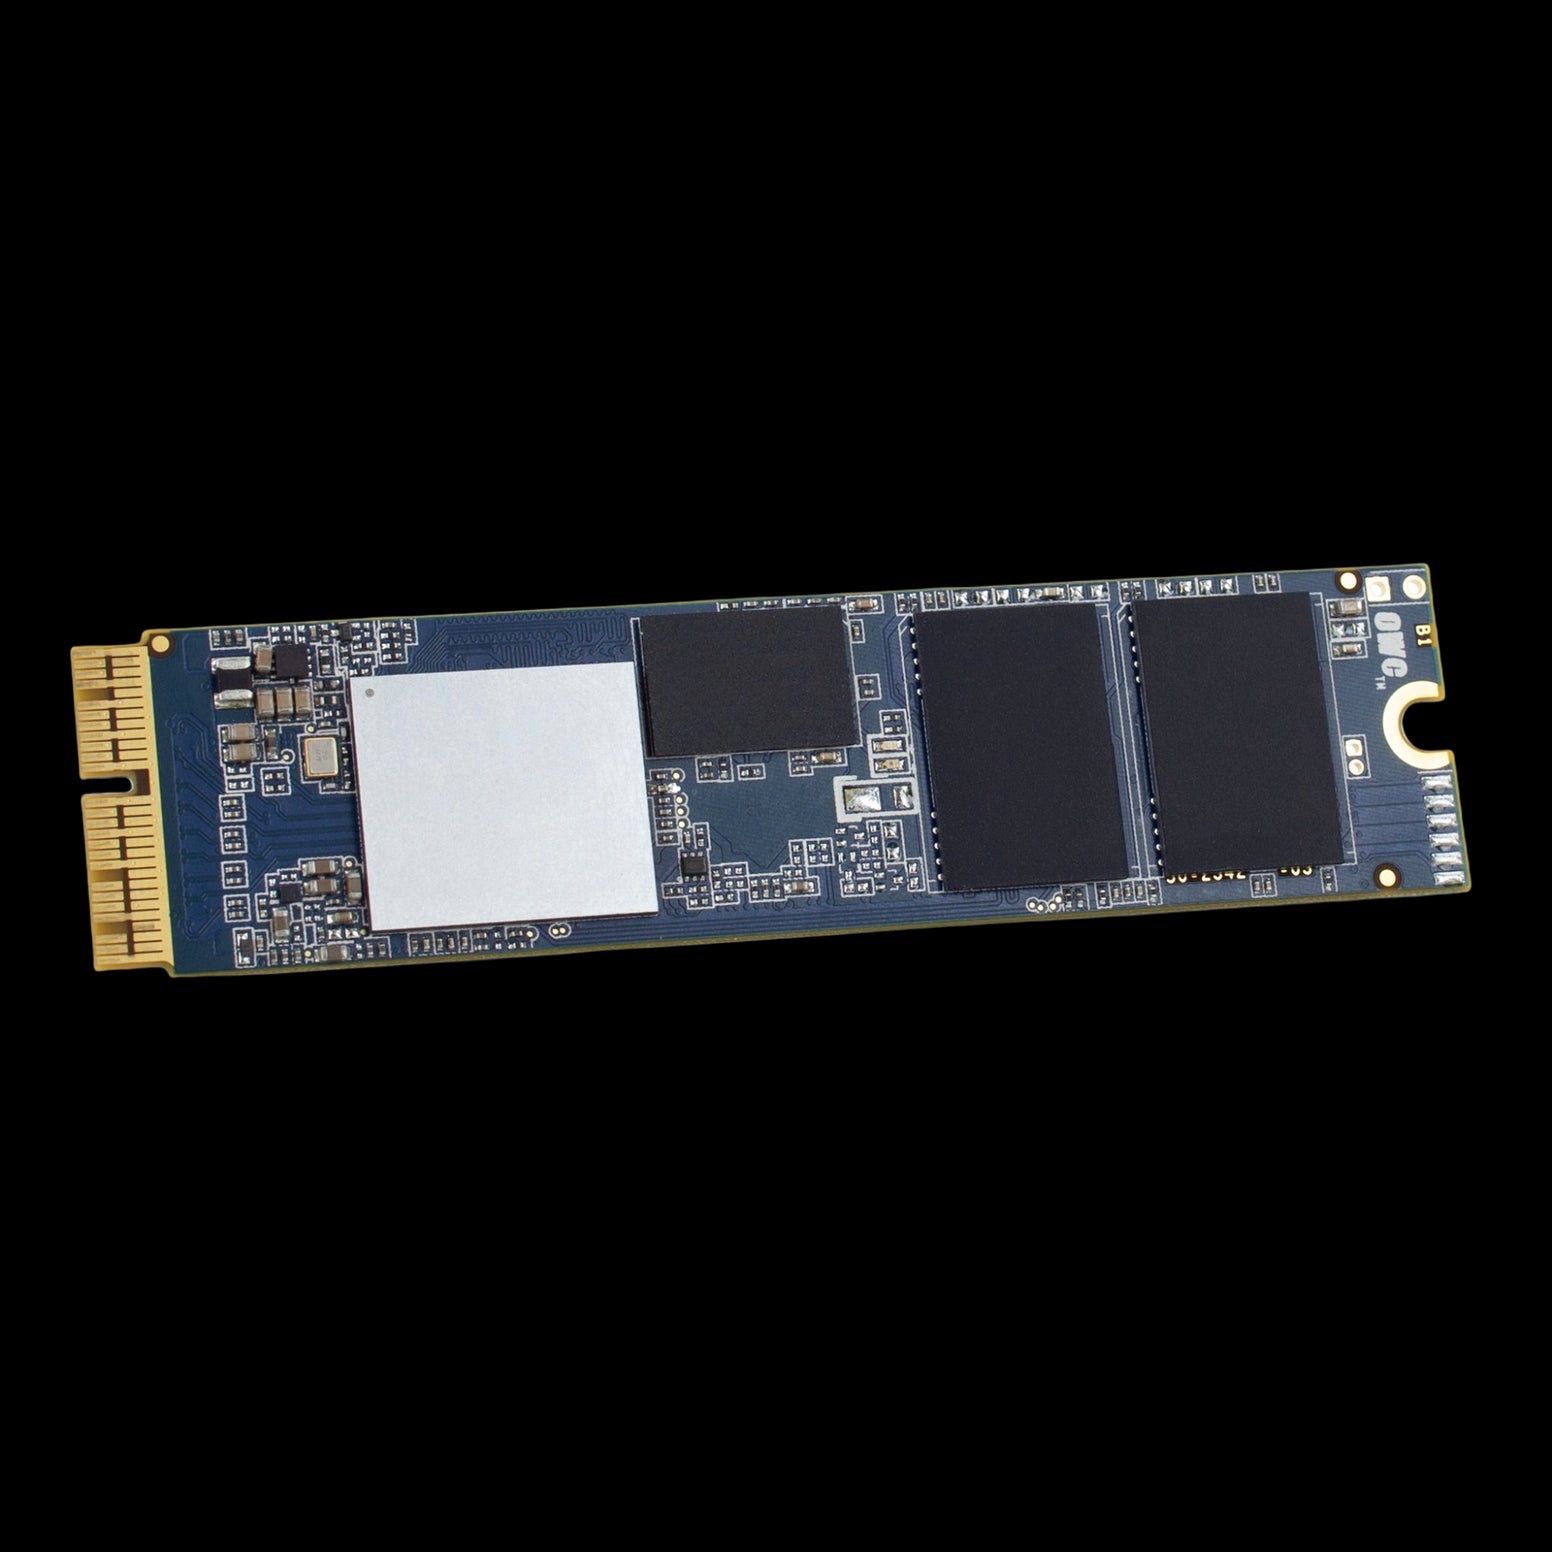 OWC 480GB Aura Pro X2 SSD with Upgrade Kit for Mac mini 2014 - Discontinued